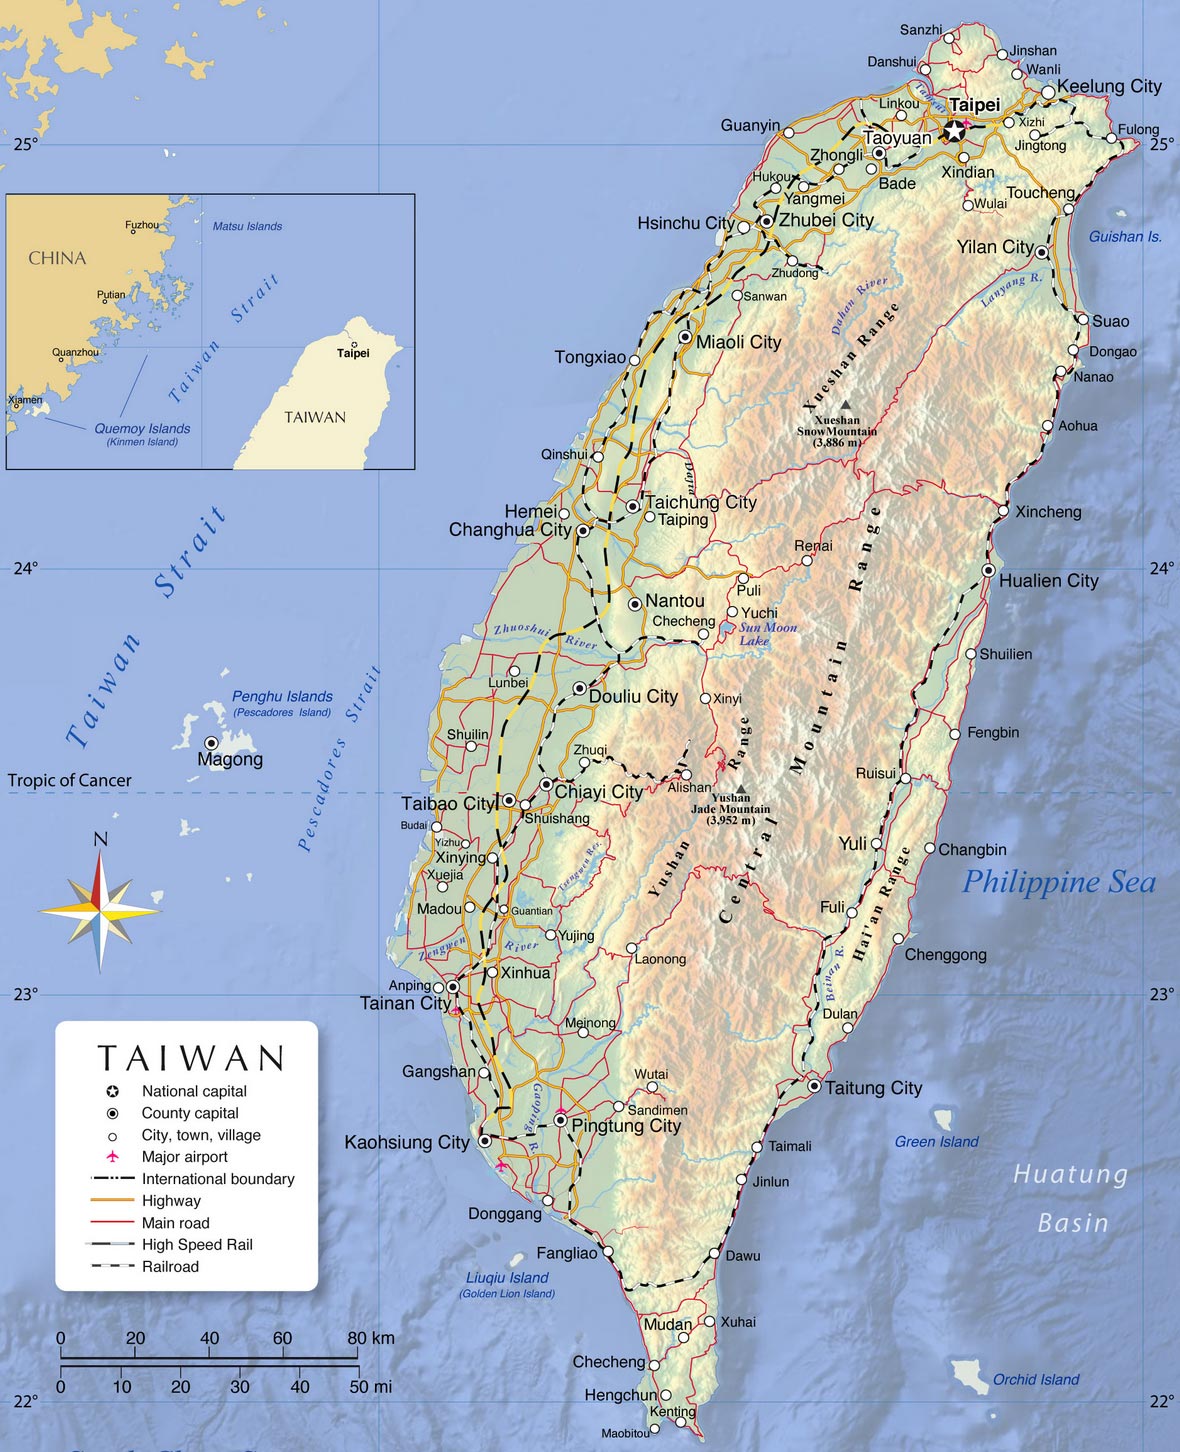 Detailed map of Taiwan with cities, main roads, railroads and airports